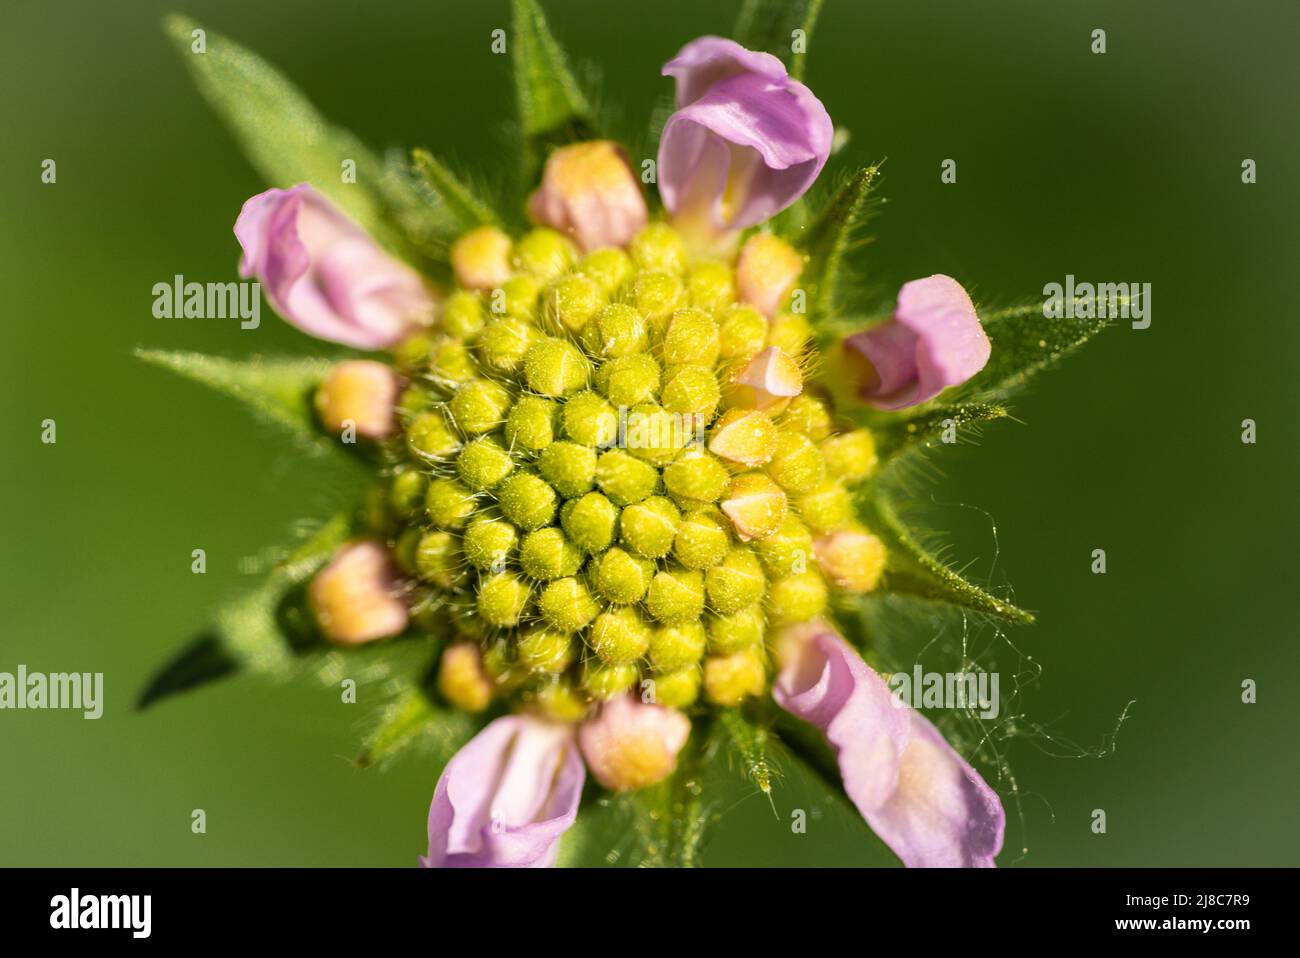 Close-up of a gipsy rose flower head seen from above with a blurry green background Stock Photo